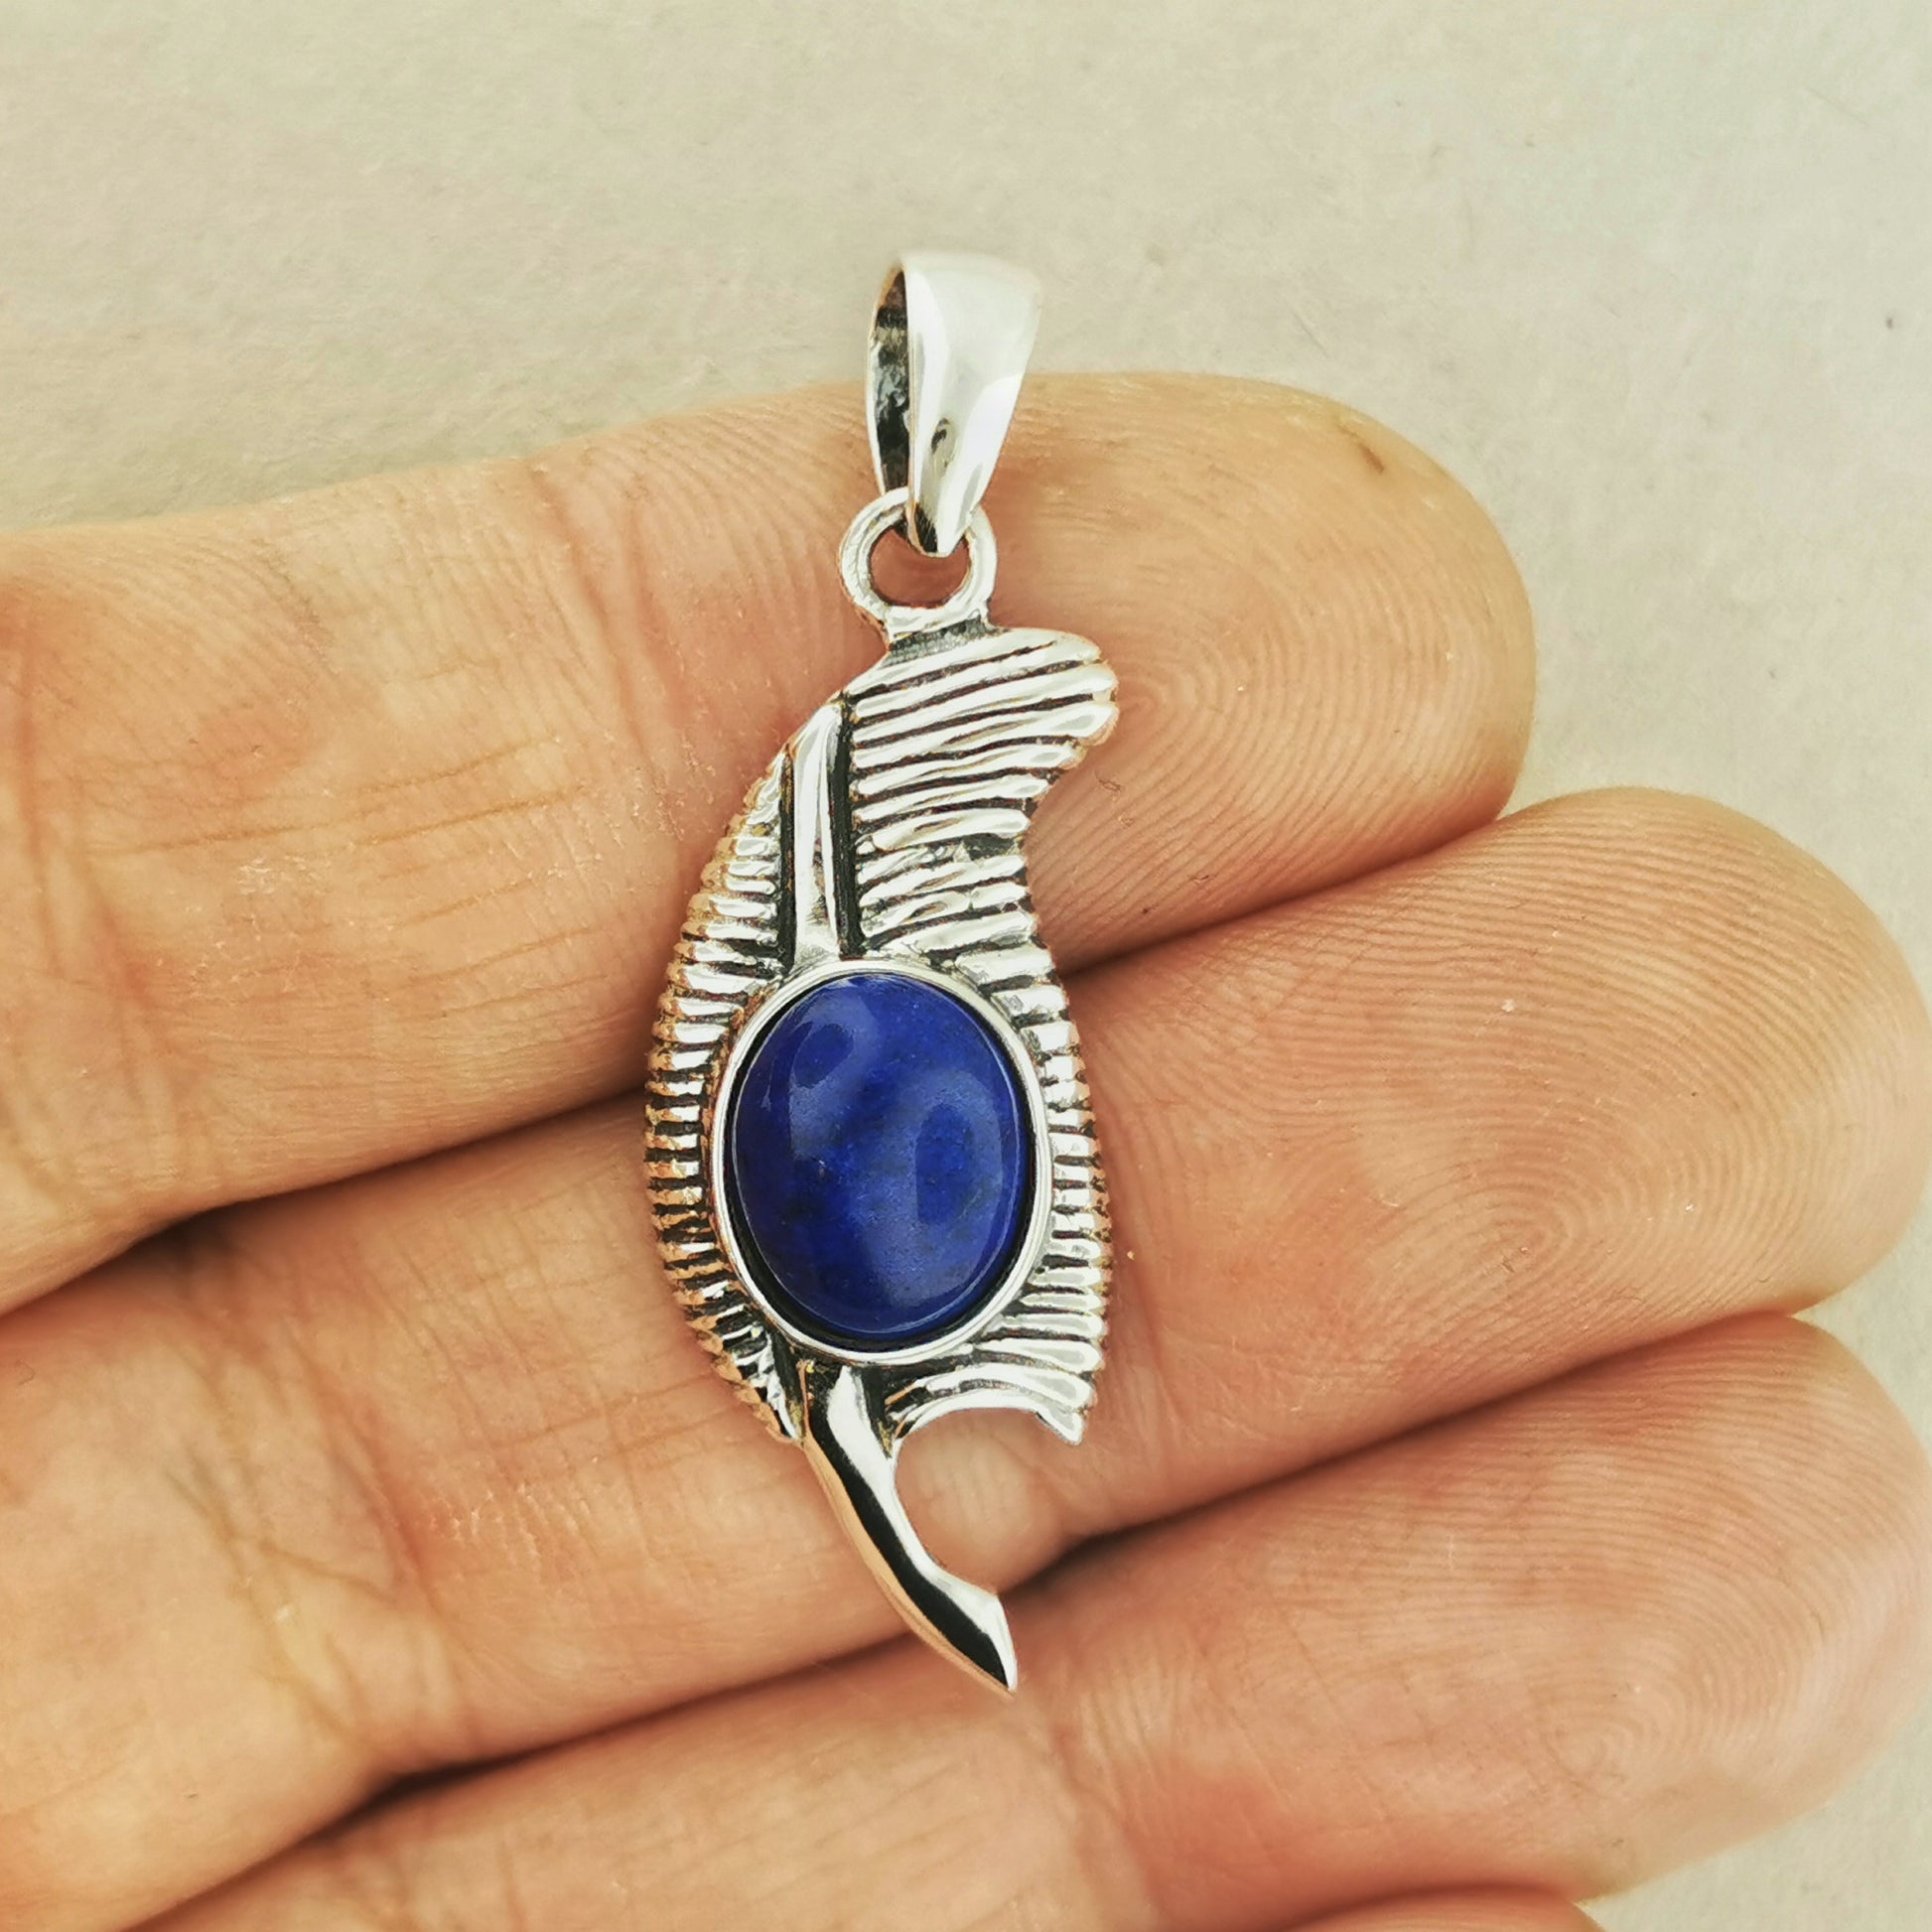 Feather of Ma'at Pendant in Sterling Silver with Lapis Lazuli, Egyptian Feather Pendant, Egyptian Goddess Pendant, Goddess of Truth Pendant, Silver Egyptian Feather Pendant, Silver Ma’at Pendant, Egyptian Silver Pendant, Silver Gemstone Egyptian Feather Pendant